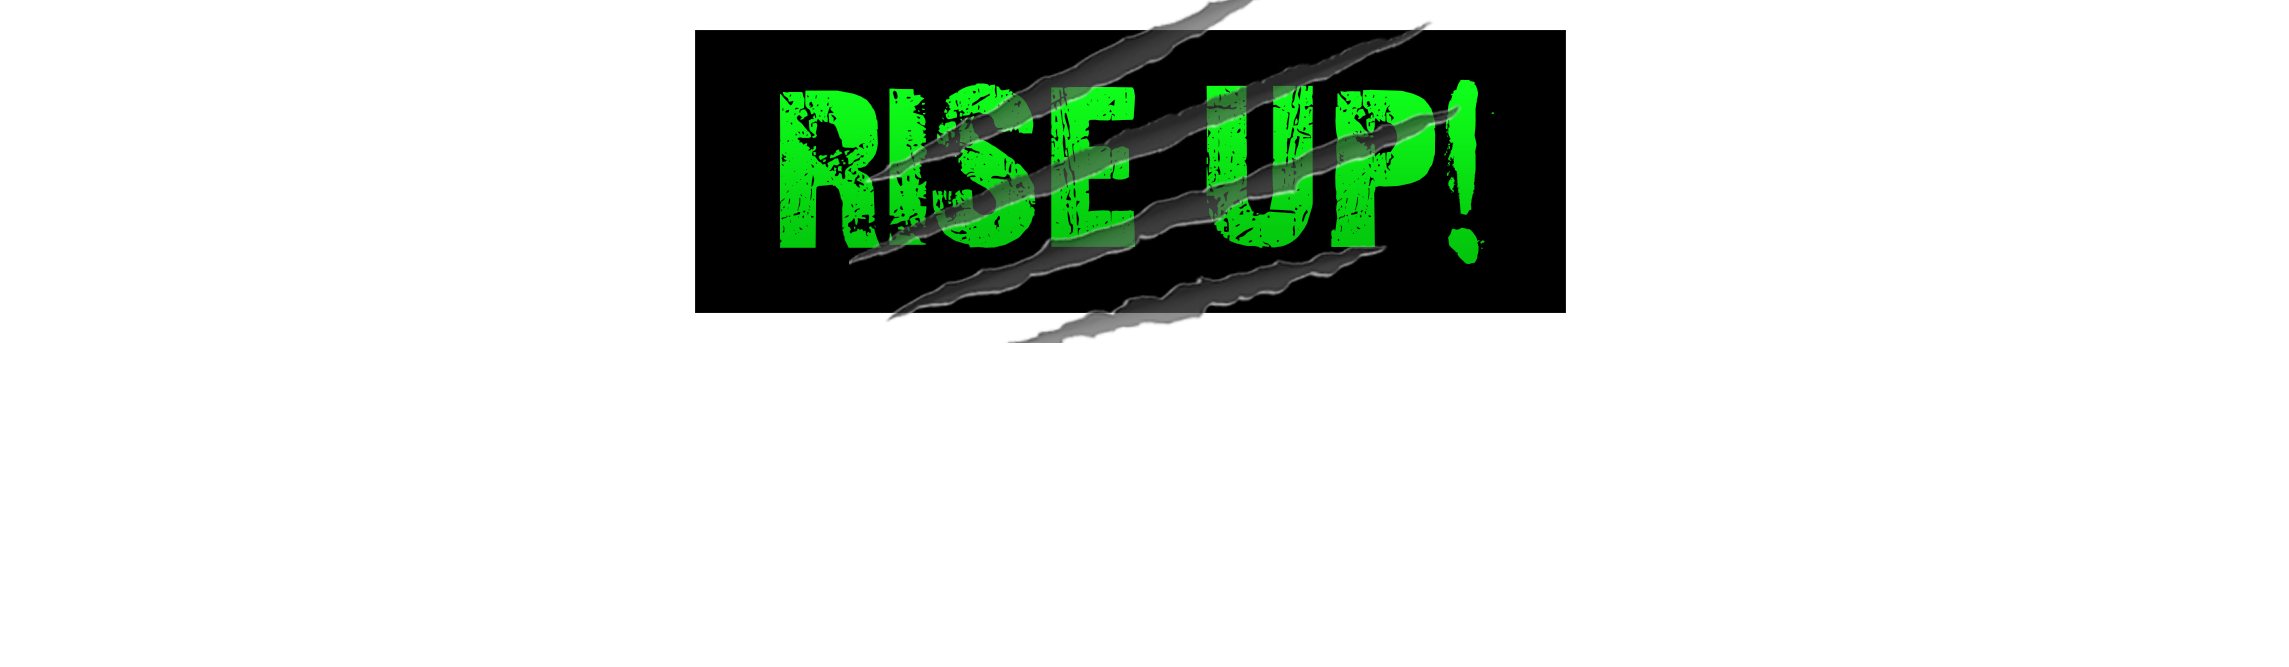 RISE UP! BECOME A MONSTERMODE 2.0 CASH BREEDER TODAY - WHILE THERE IS STILL TIME...